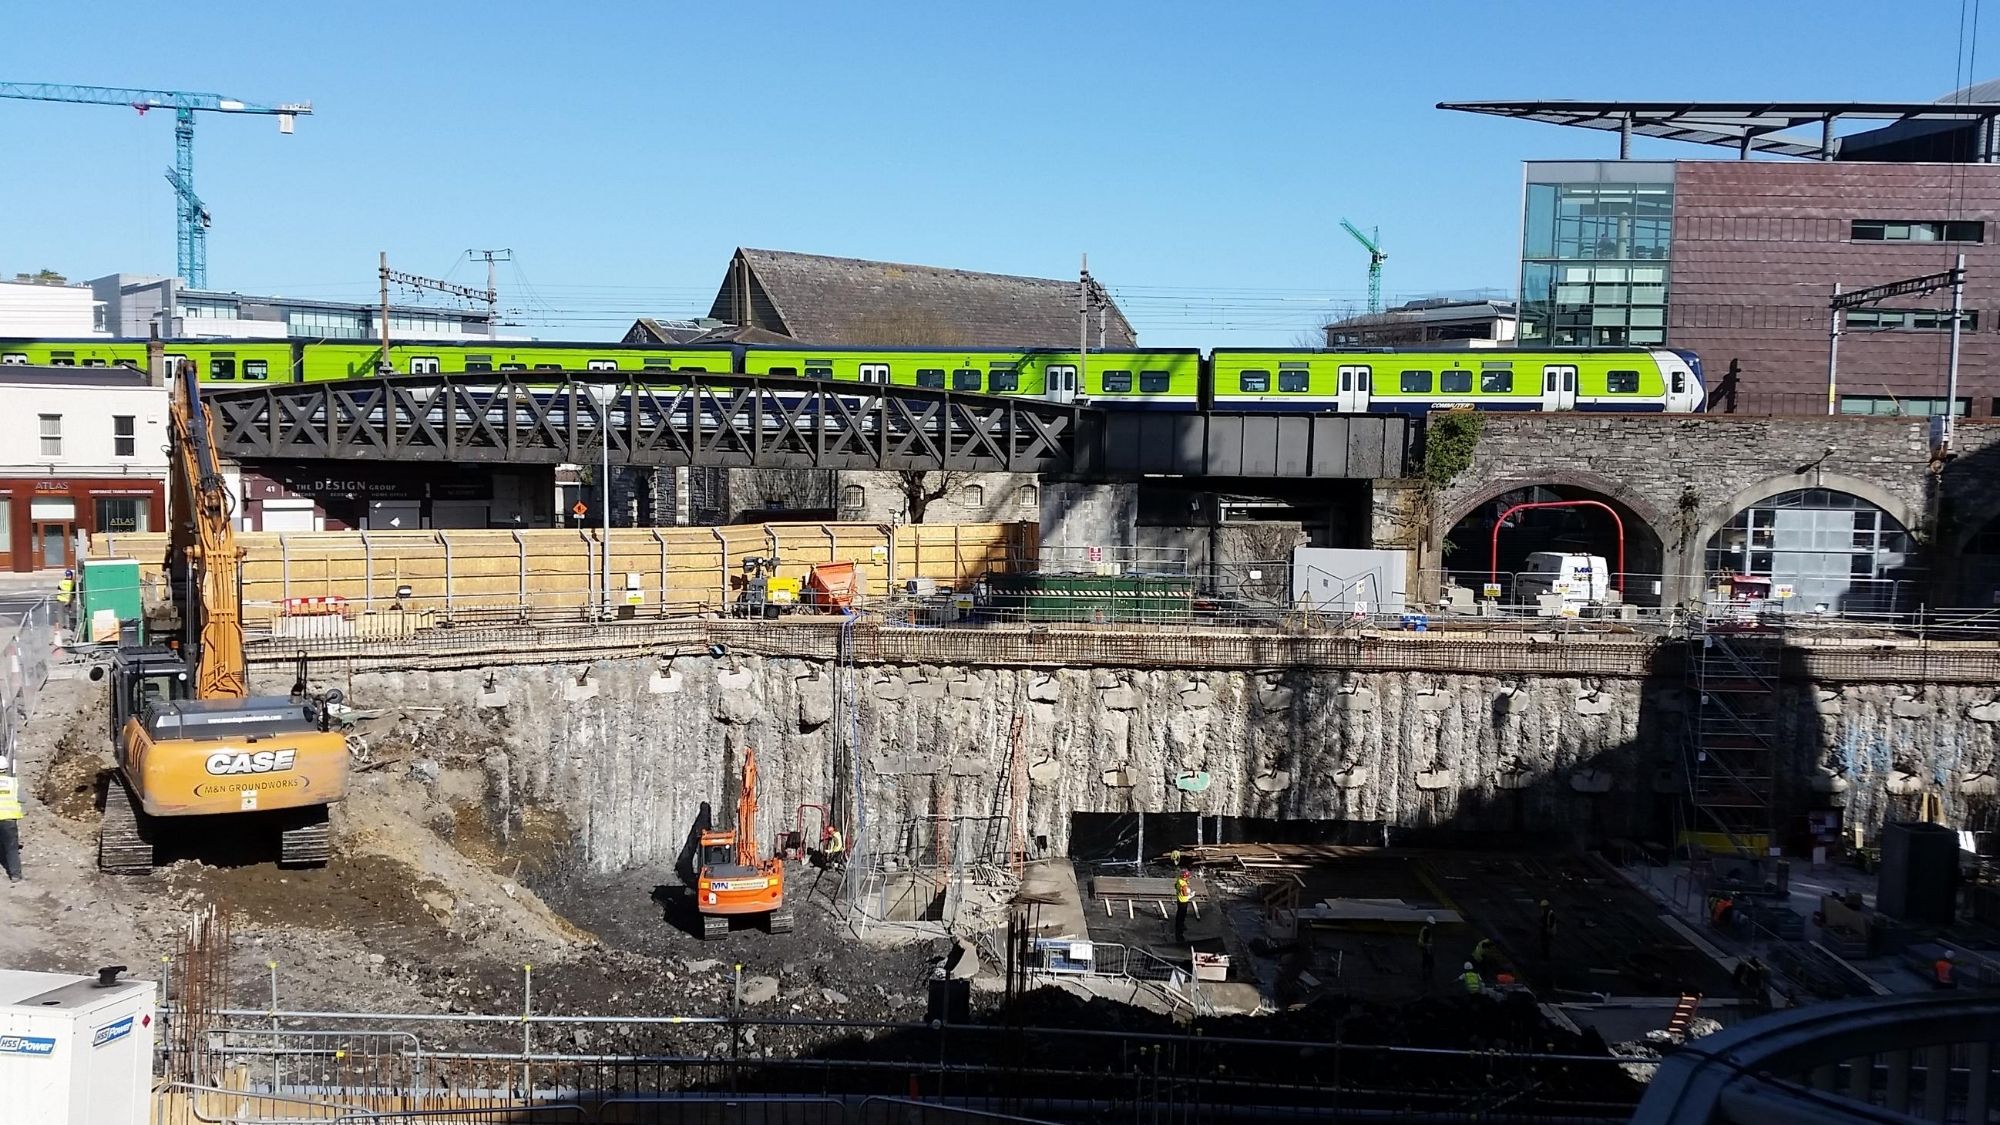 Construction photo of the site at Trinity Business School showing the excavation of the double-height basement alongside the railway line. A train is seen passing beside the construction site.